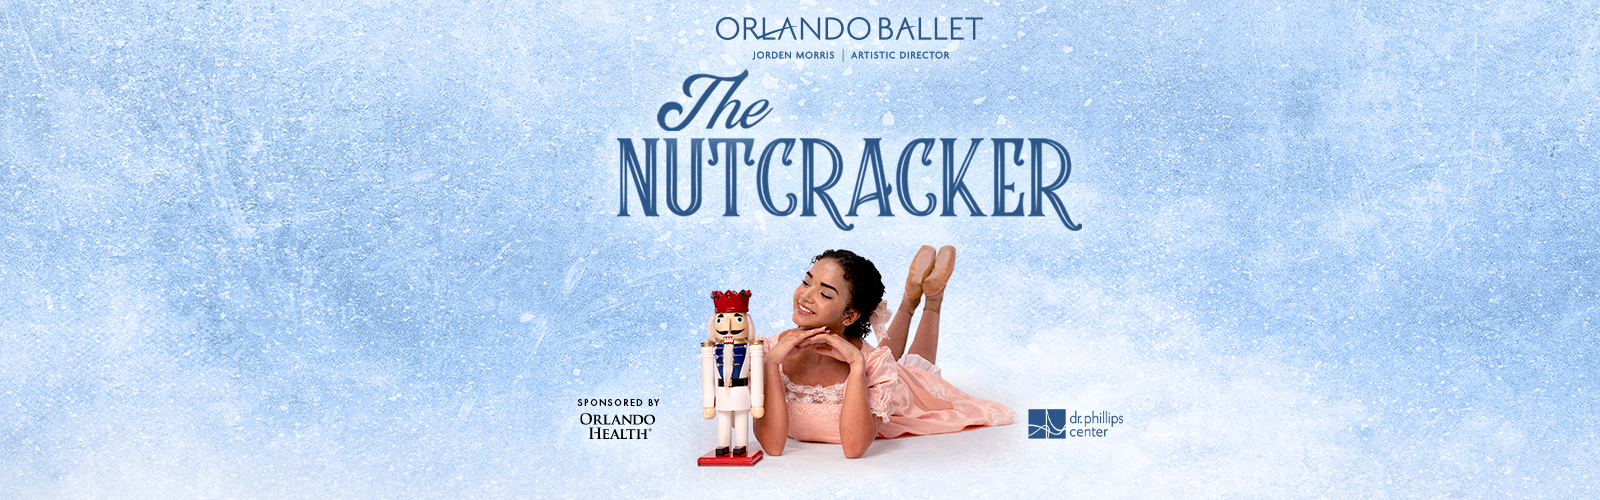 TICKETS FOR THE NUTCRACKER ARE NOW ON SALE!